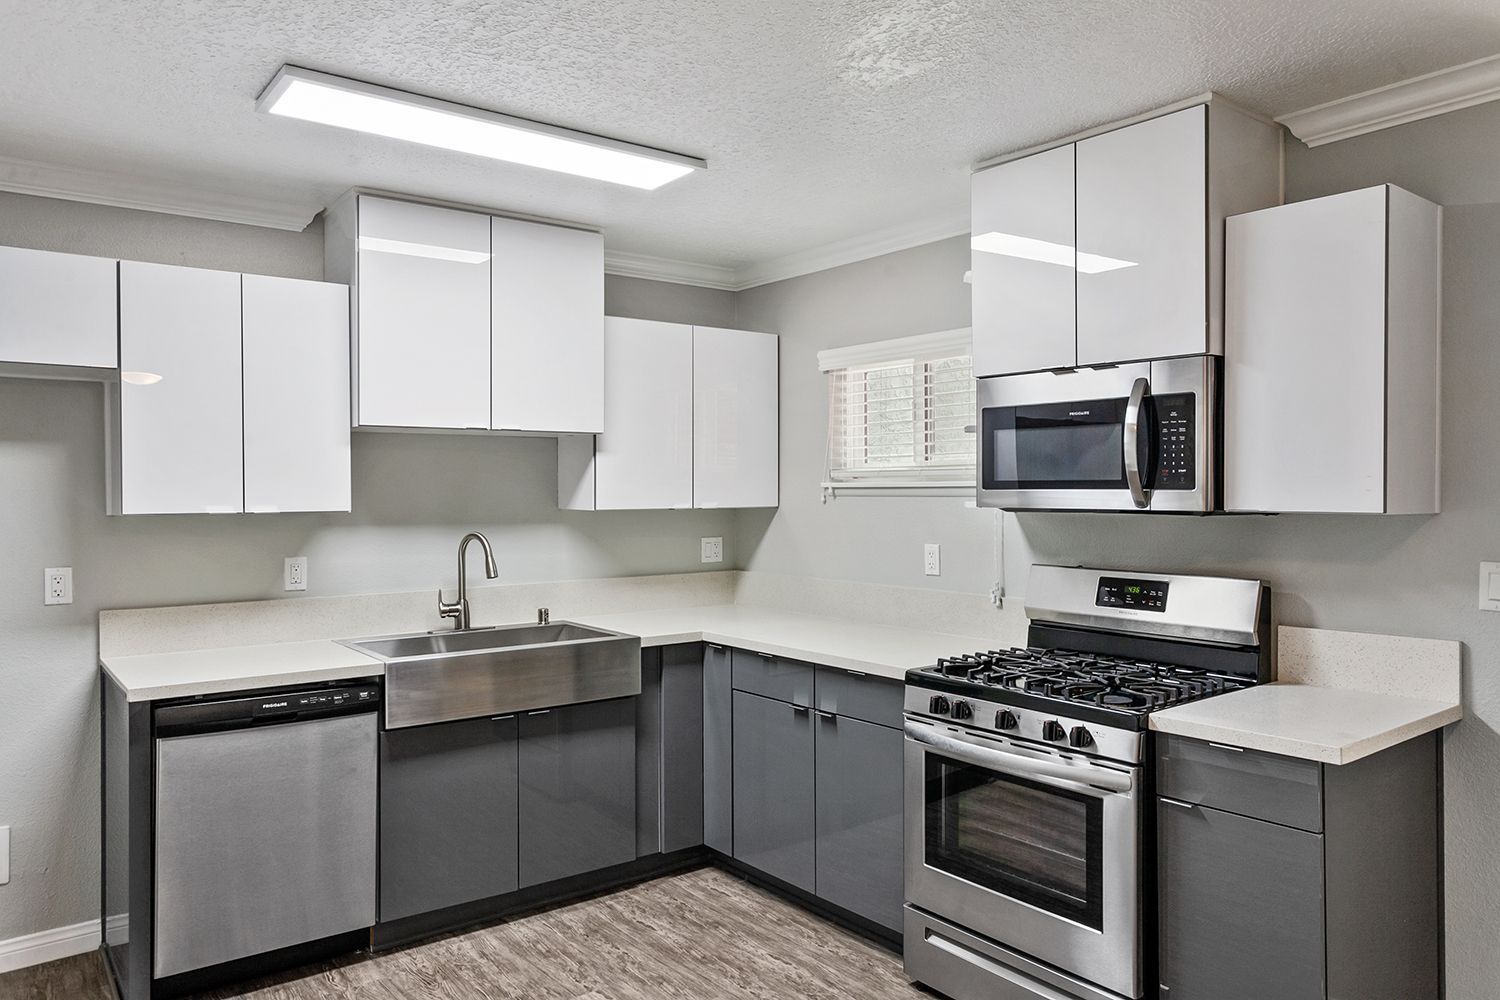 Photo gallery slider displaying the apartment amenities listed